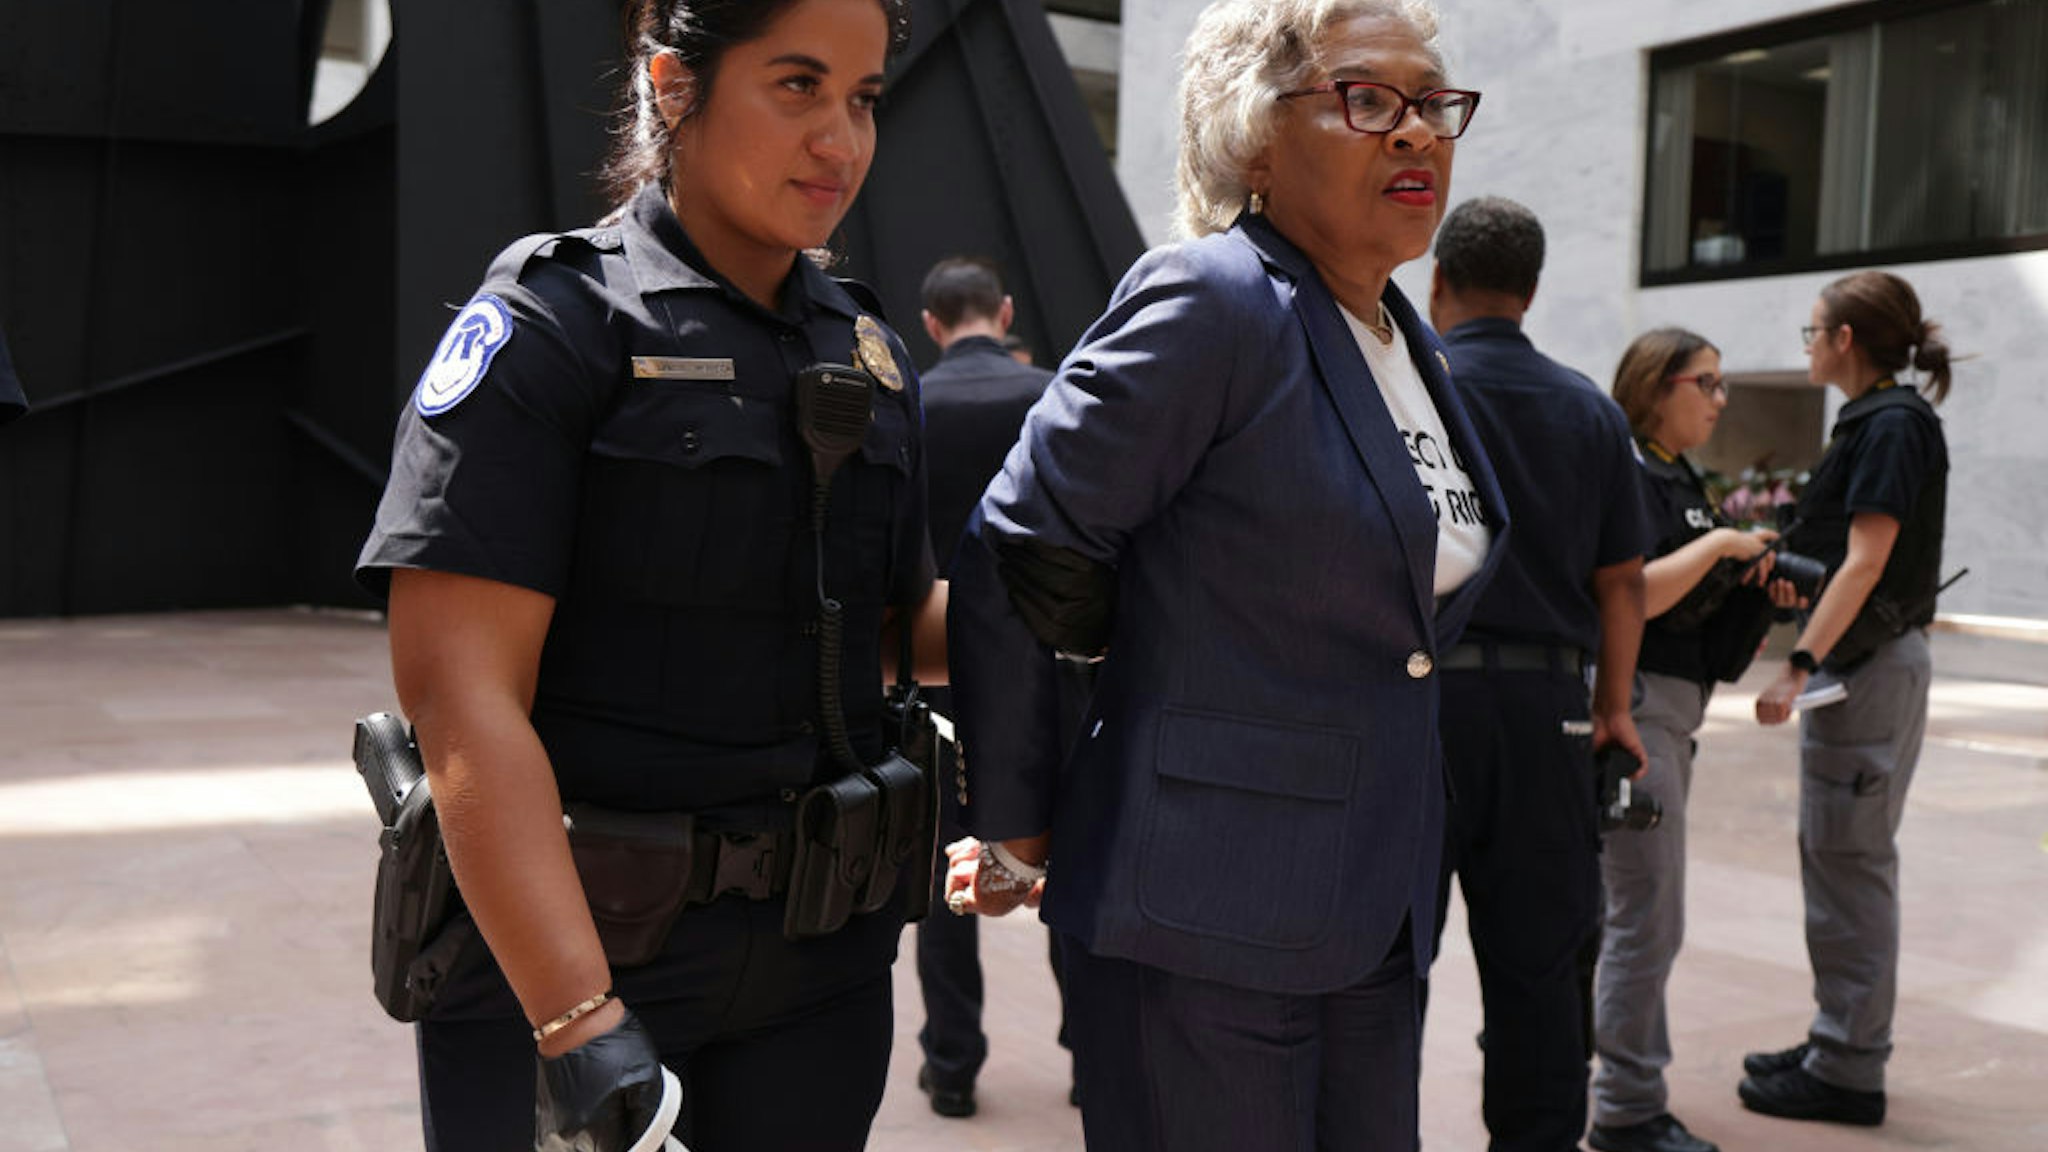 WASHINGTON, DC - JULY 15: U.S. Rep. Joyce Beatty (D-OH) (2nd L) and Chair of Congressional Black Caucus (CBC), is led away by a member of the U.S. Capitol Police during a protest at Hart Senate Office Building July 15, 2021 on Capitol Hill in Washington, DC.